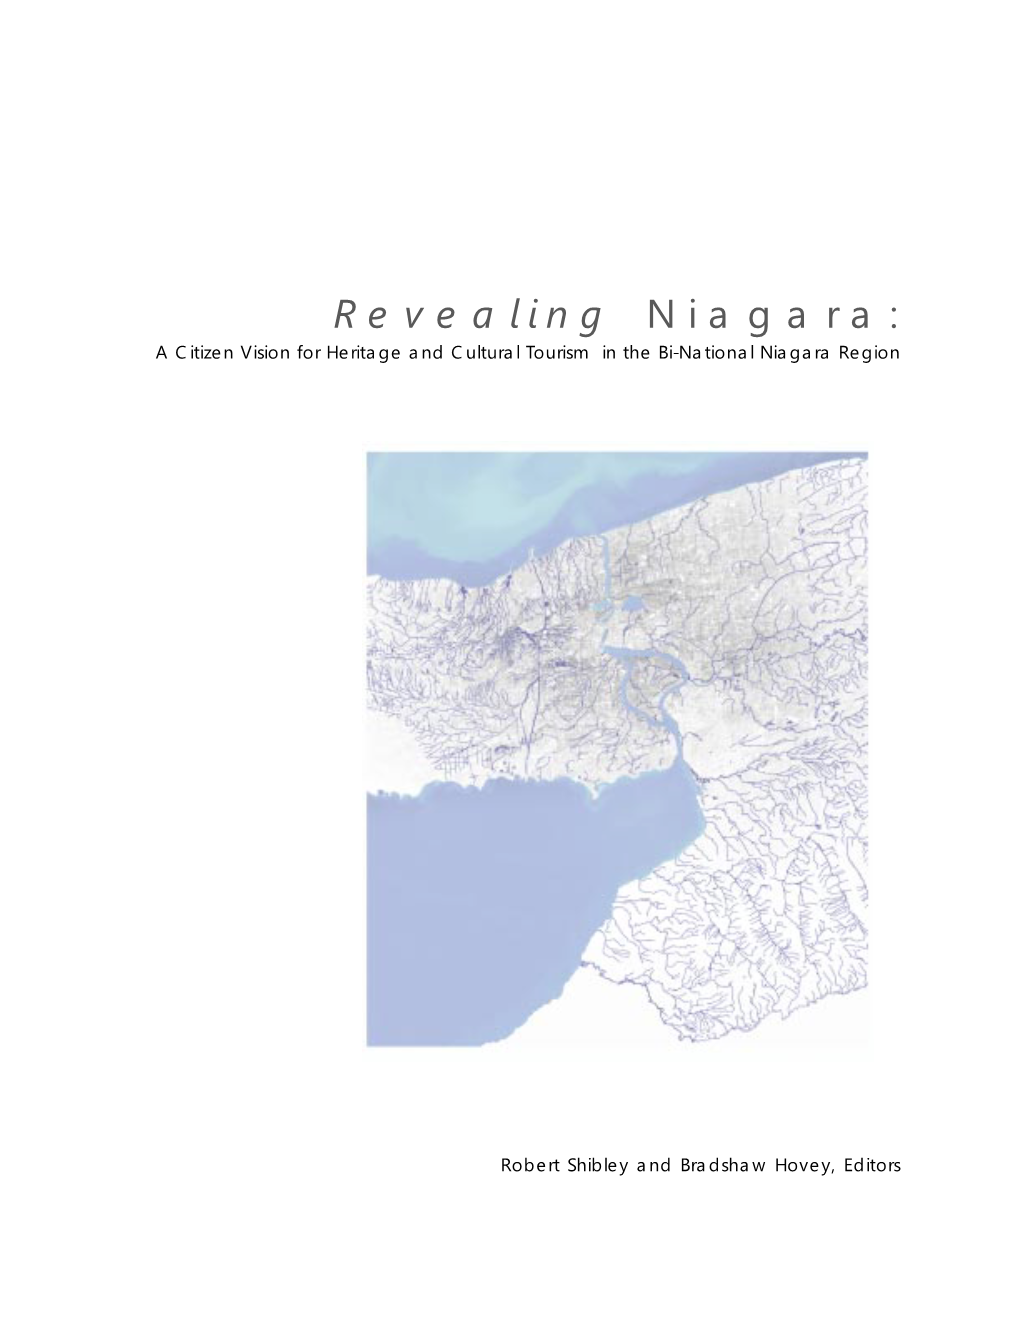 Revealing Niagara: a Citizen Vision for Heritage and Cultural Tourism in the Bi-National Niagara Region